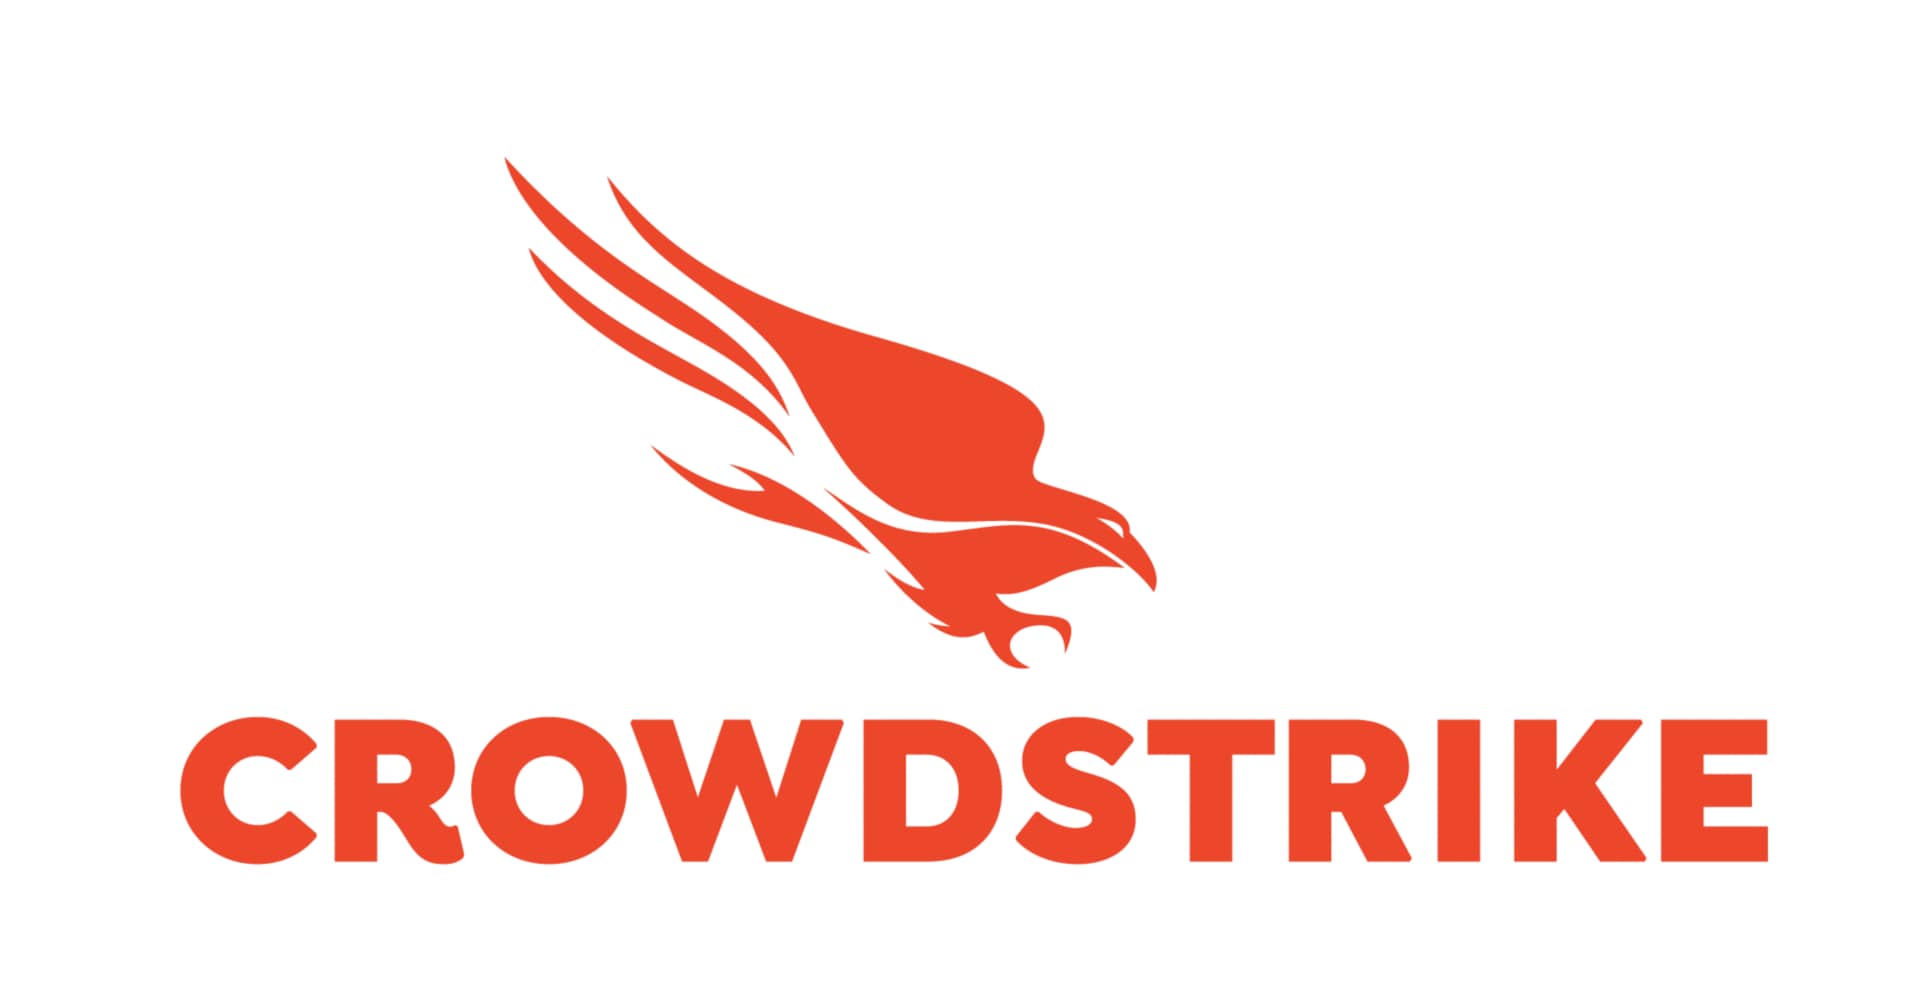 CrowdStrike 12-Month Falcon Intelligence Application Software Subscription (300-499 Licenses)